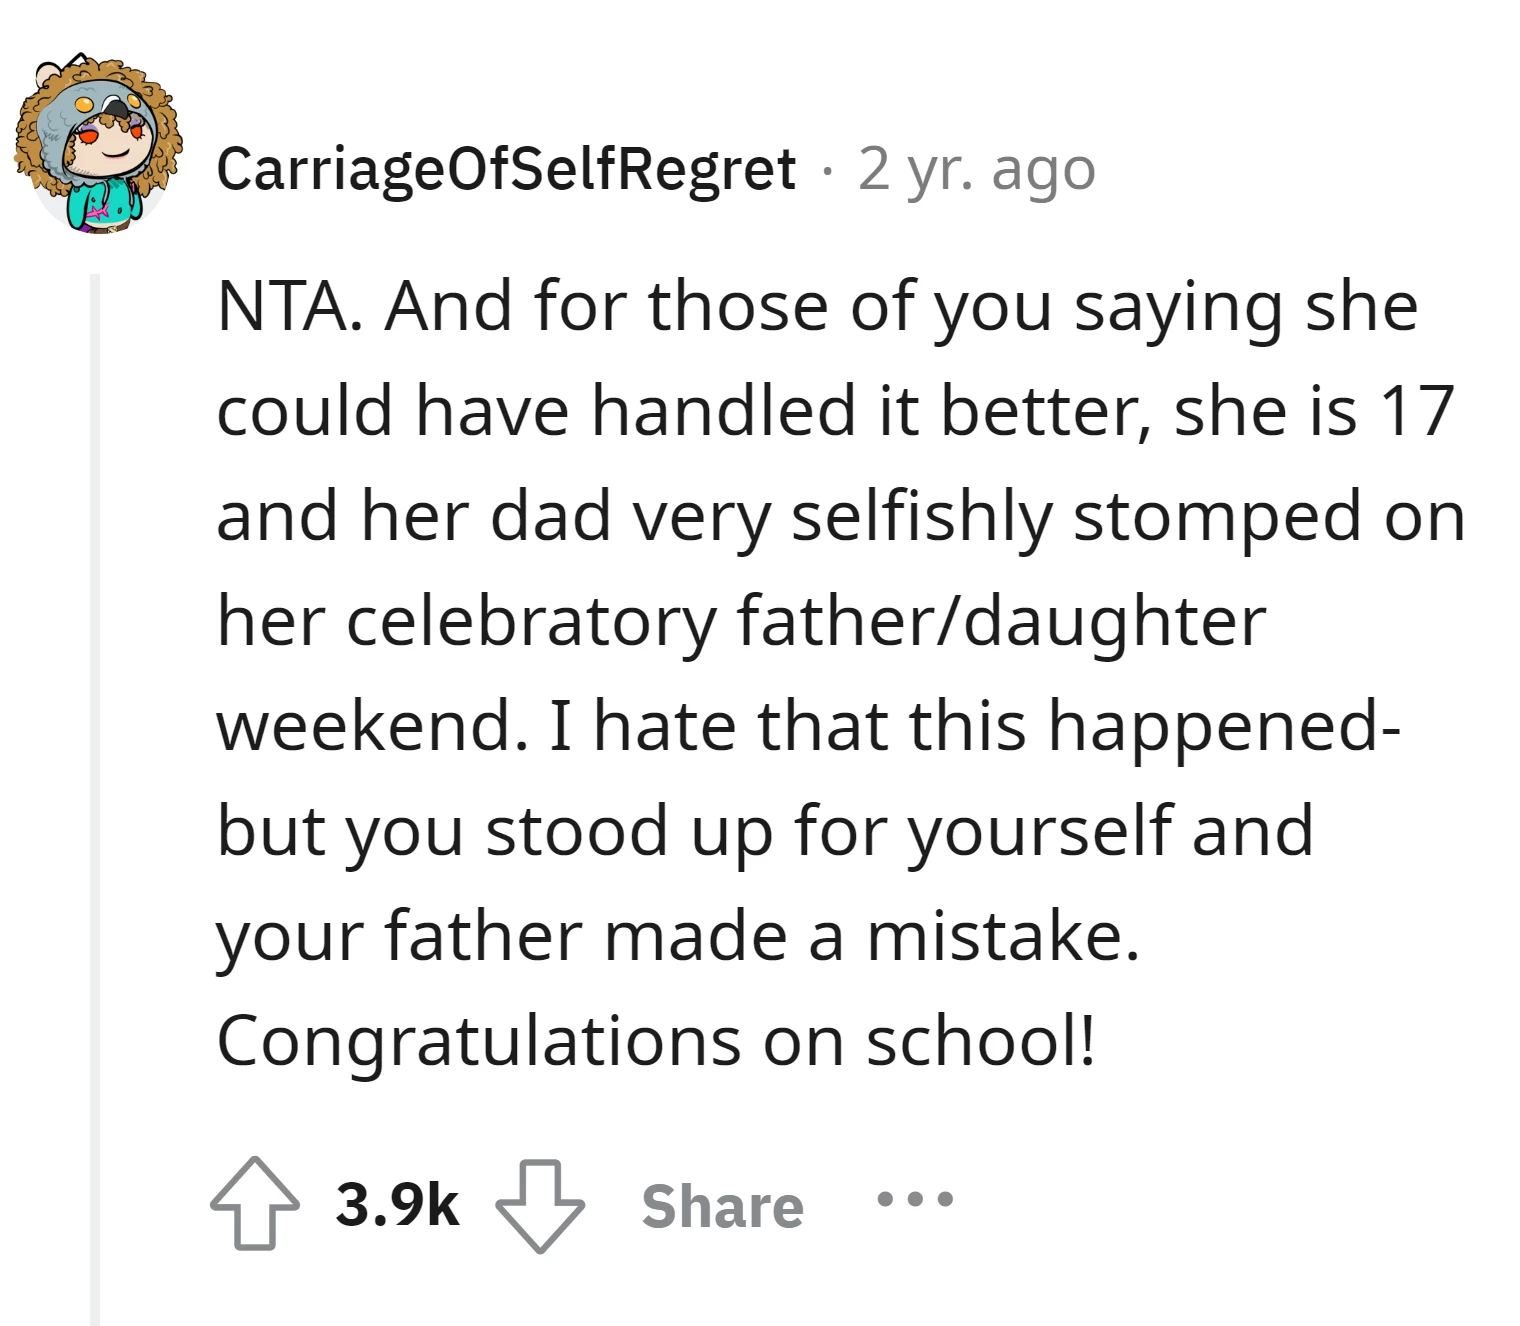 Redditors commend OP for standing up for herself